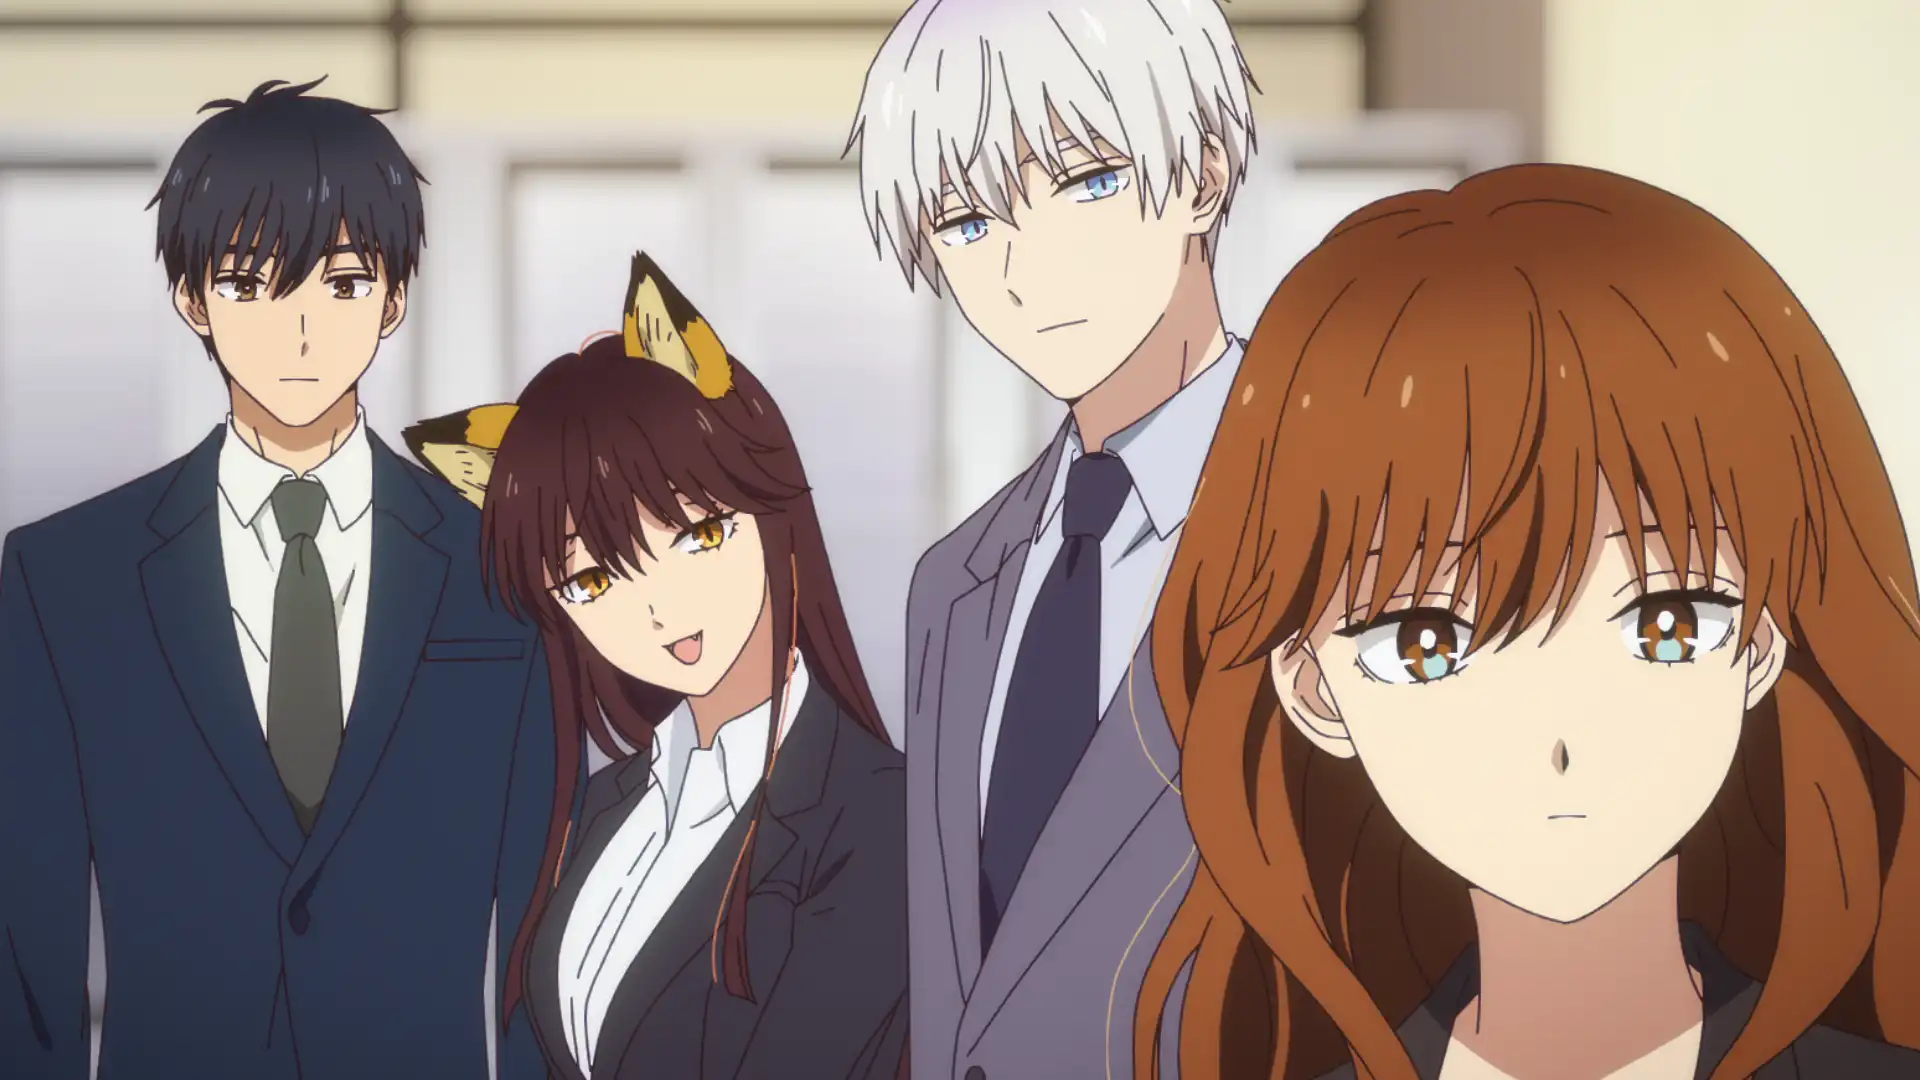 The Ice Guy and His Cool Female Colleague Episode 1 Preview Released -  Anime Corner